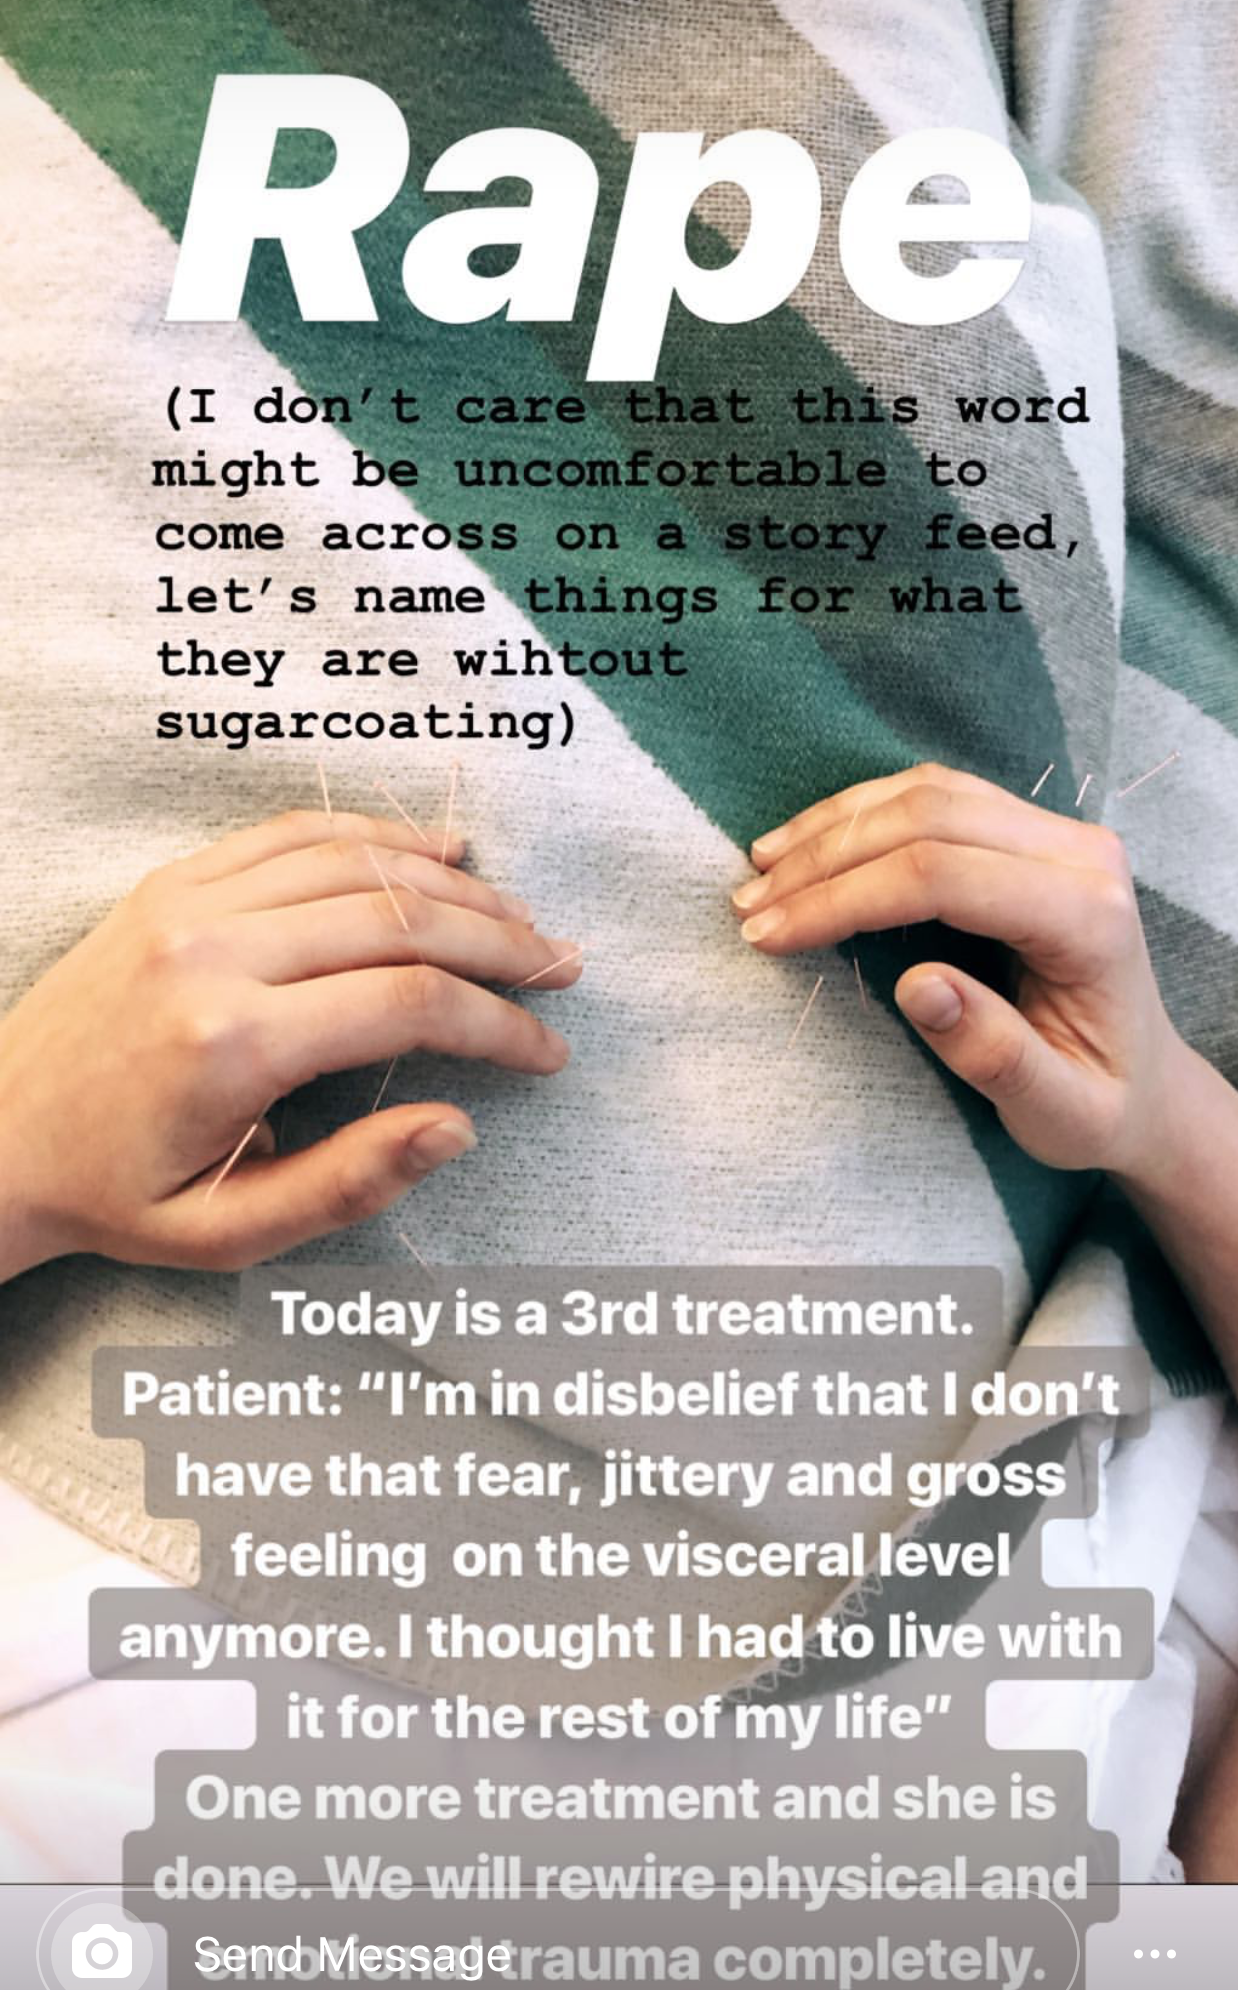  SuJok acupuncture in Vancouver used for treating mental health issues. Patient received treatment for emotional effects of being raped. After third treatment, patient is no longer feeling negatively towards herself and her sexuality  